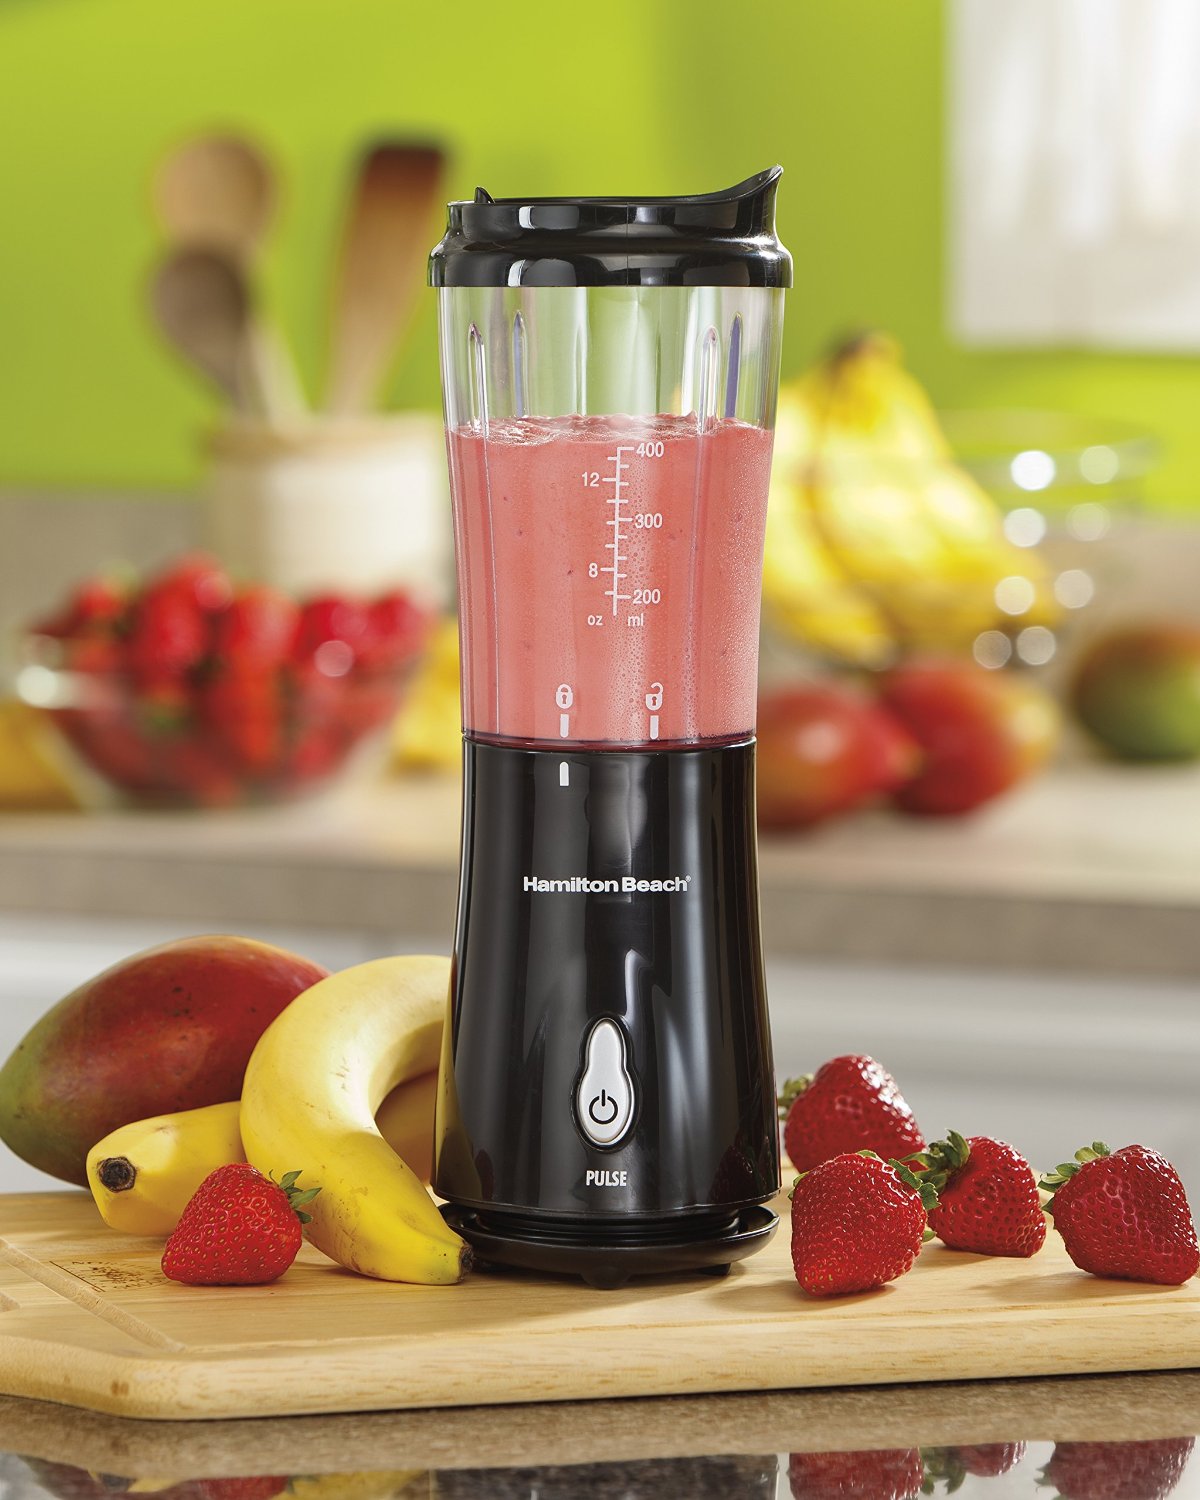 A black Hamilton Beach personal blender next to bananas and strawberries on a kitchen counter.